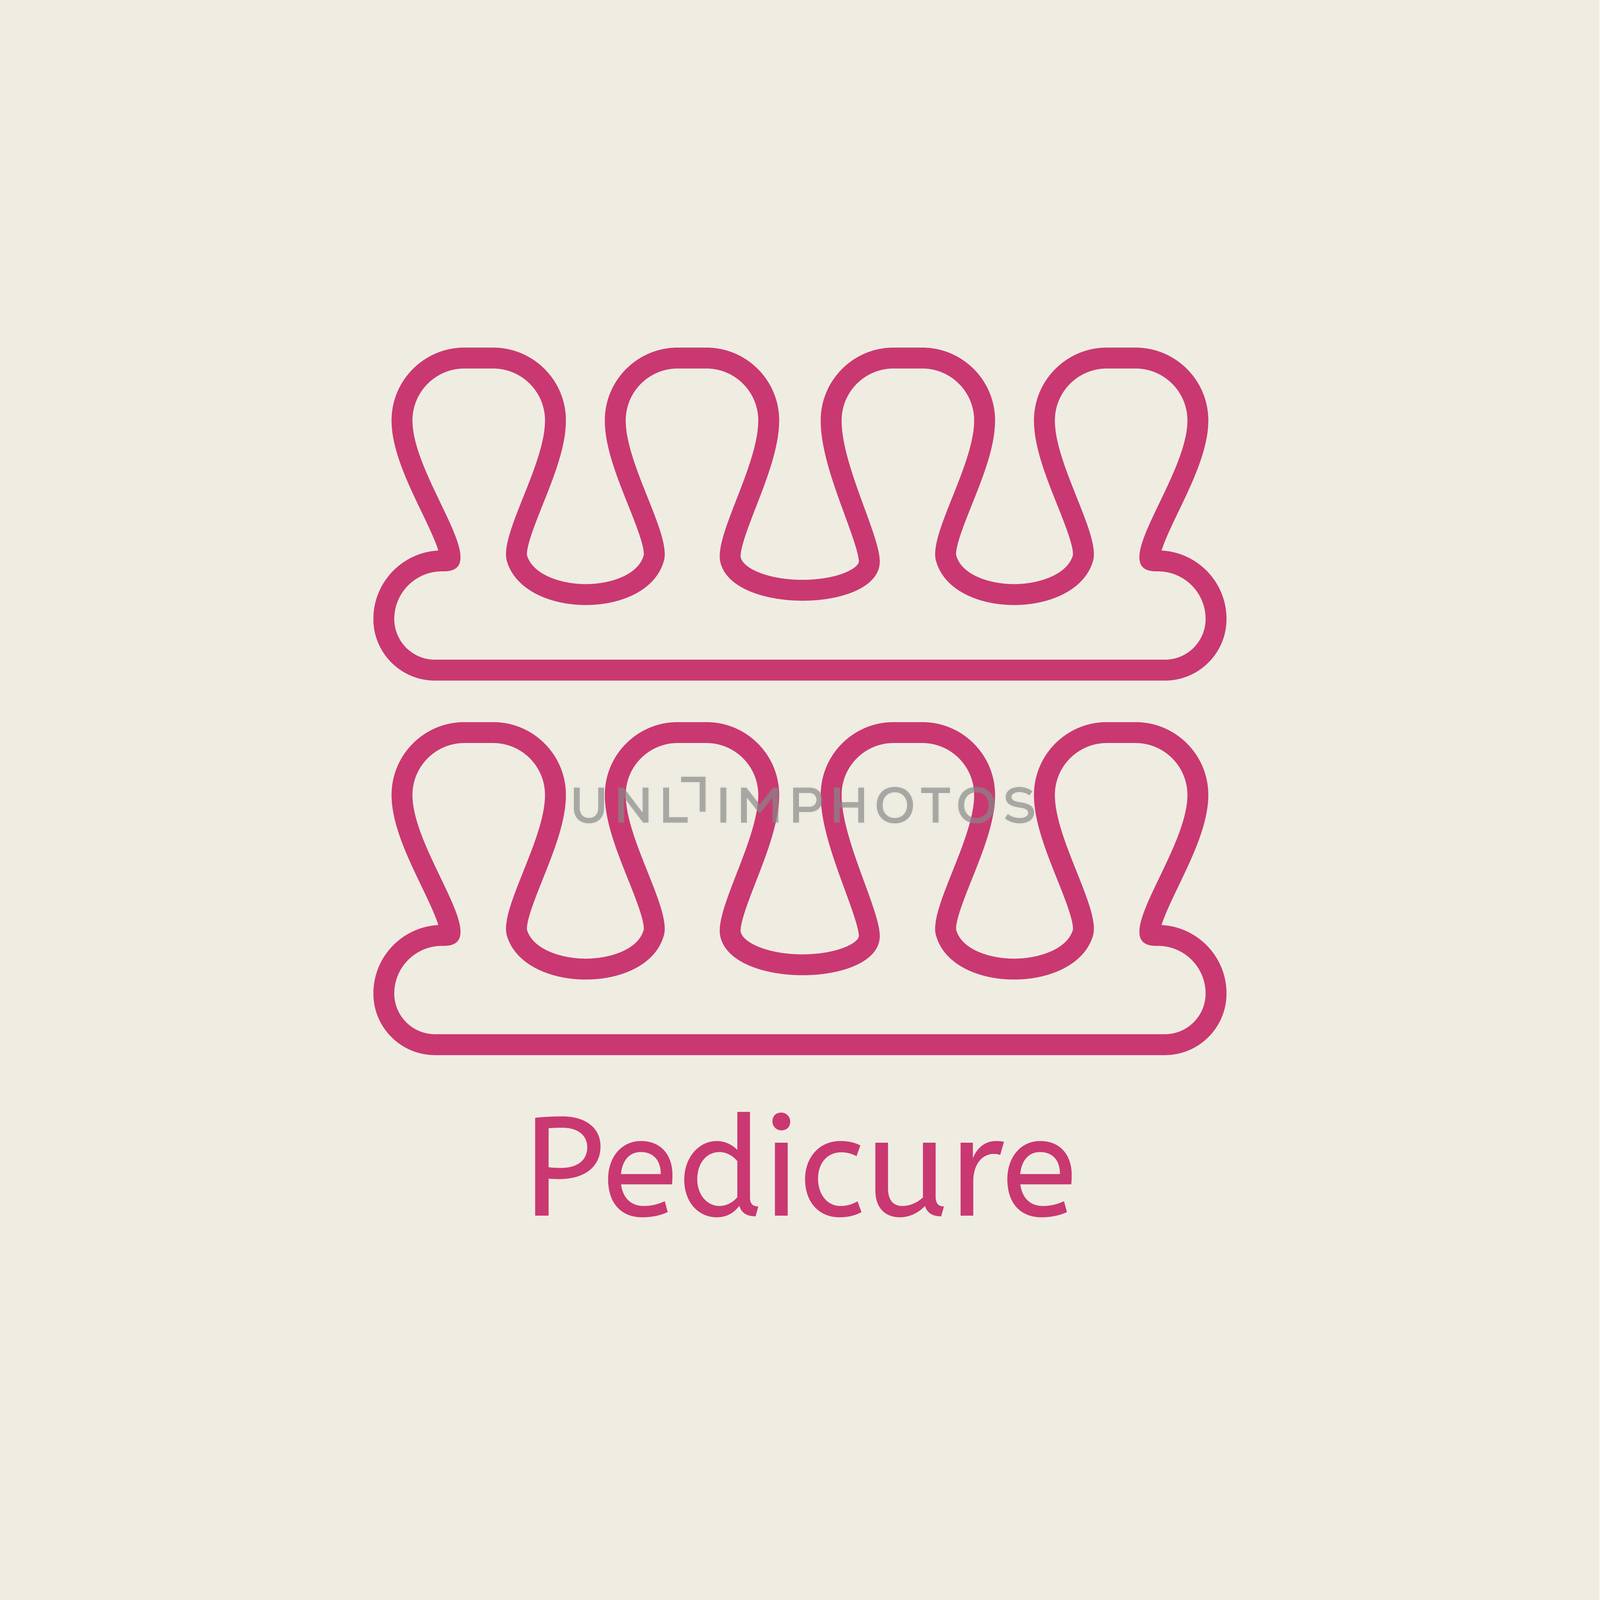 Manicure and pedicure fingers and toes separators thin line icon. Isolated illustration. by Elena_Garder